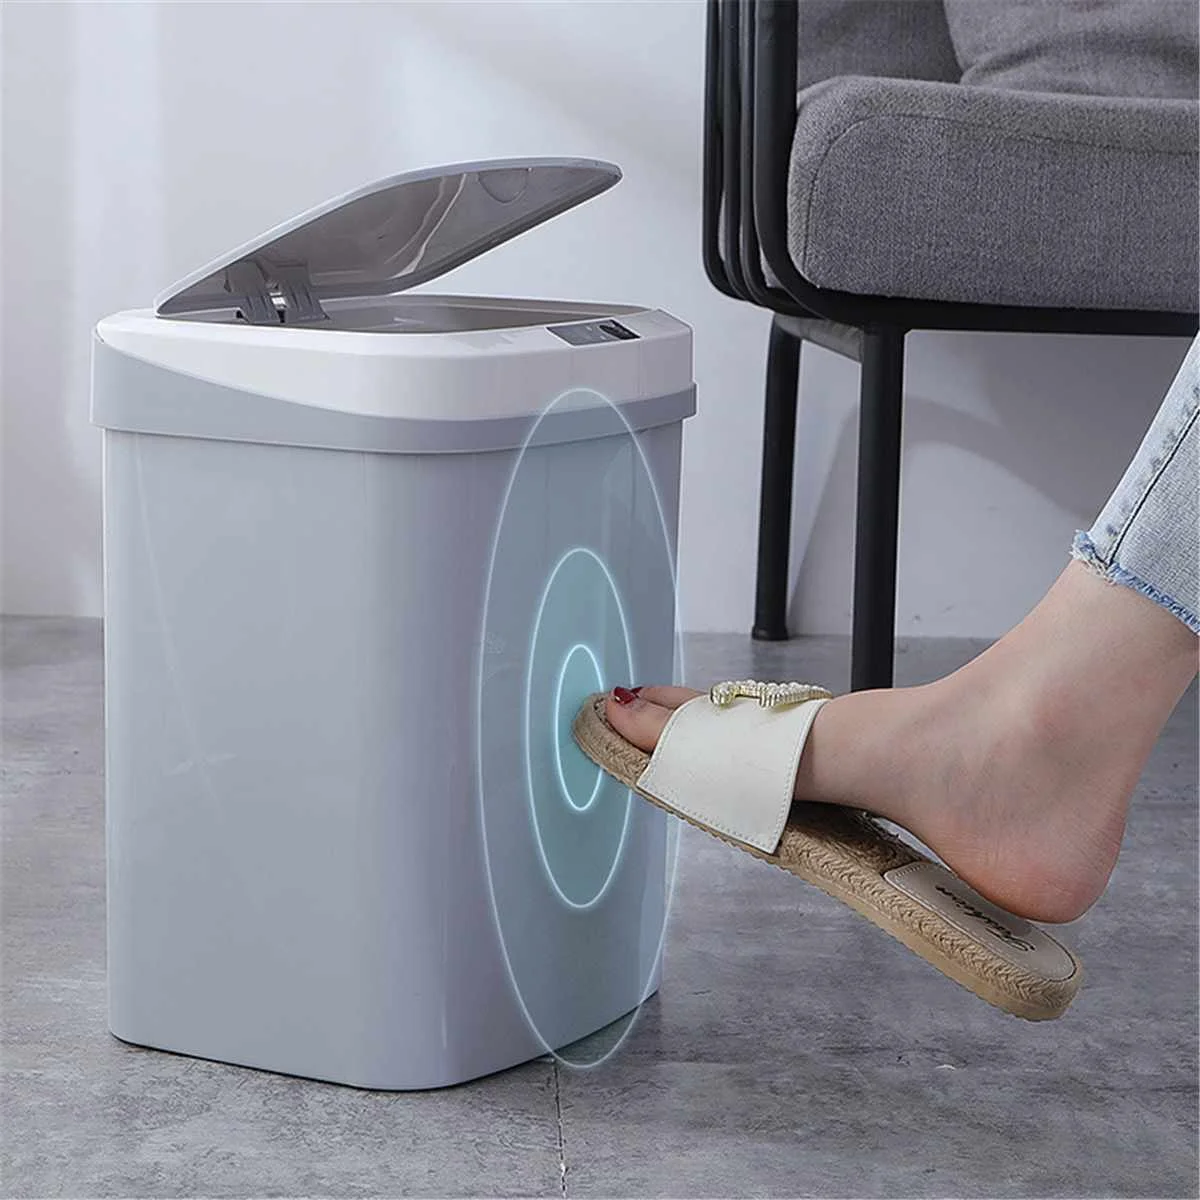 

15L Induction Automatic Touchless Smart Infrared Motion Sensor Rubbish Waste Bin Kitchen Trash Can Garbage Bins for Home Car, White,khaki,grey,black